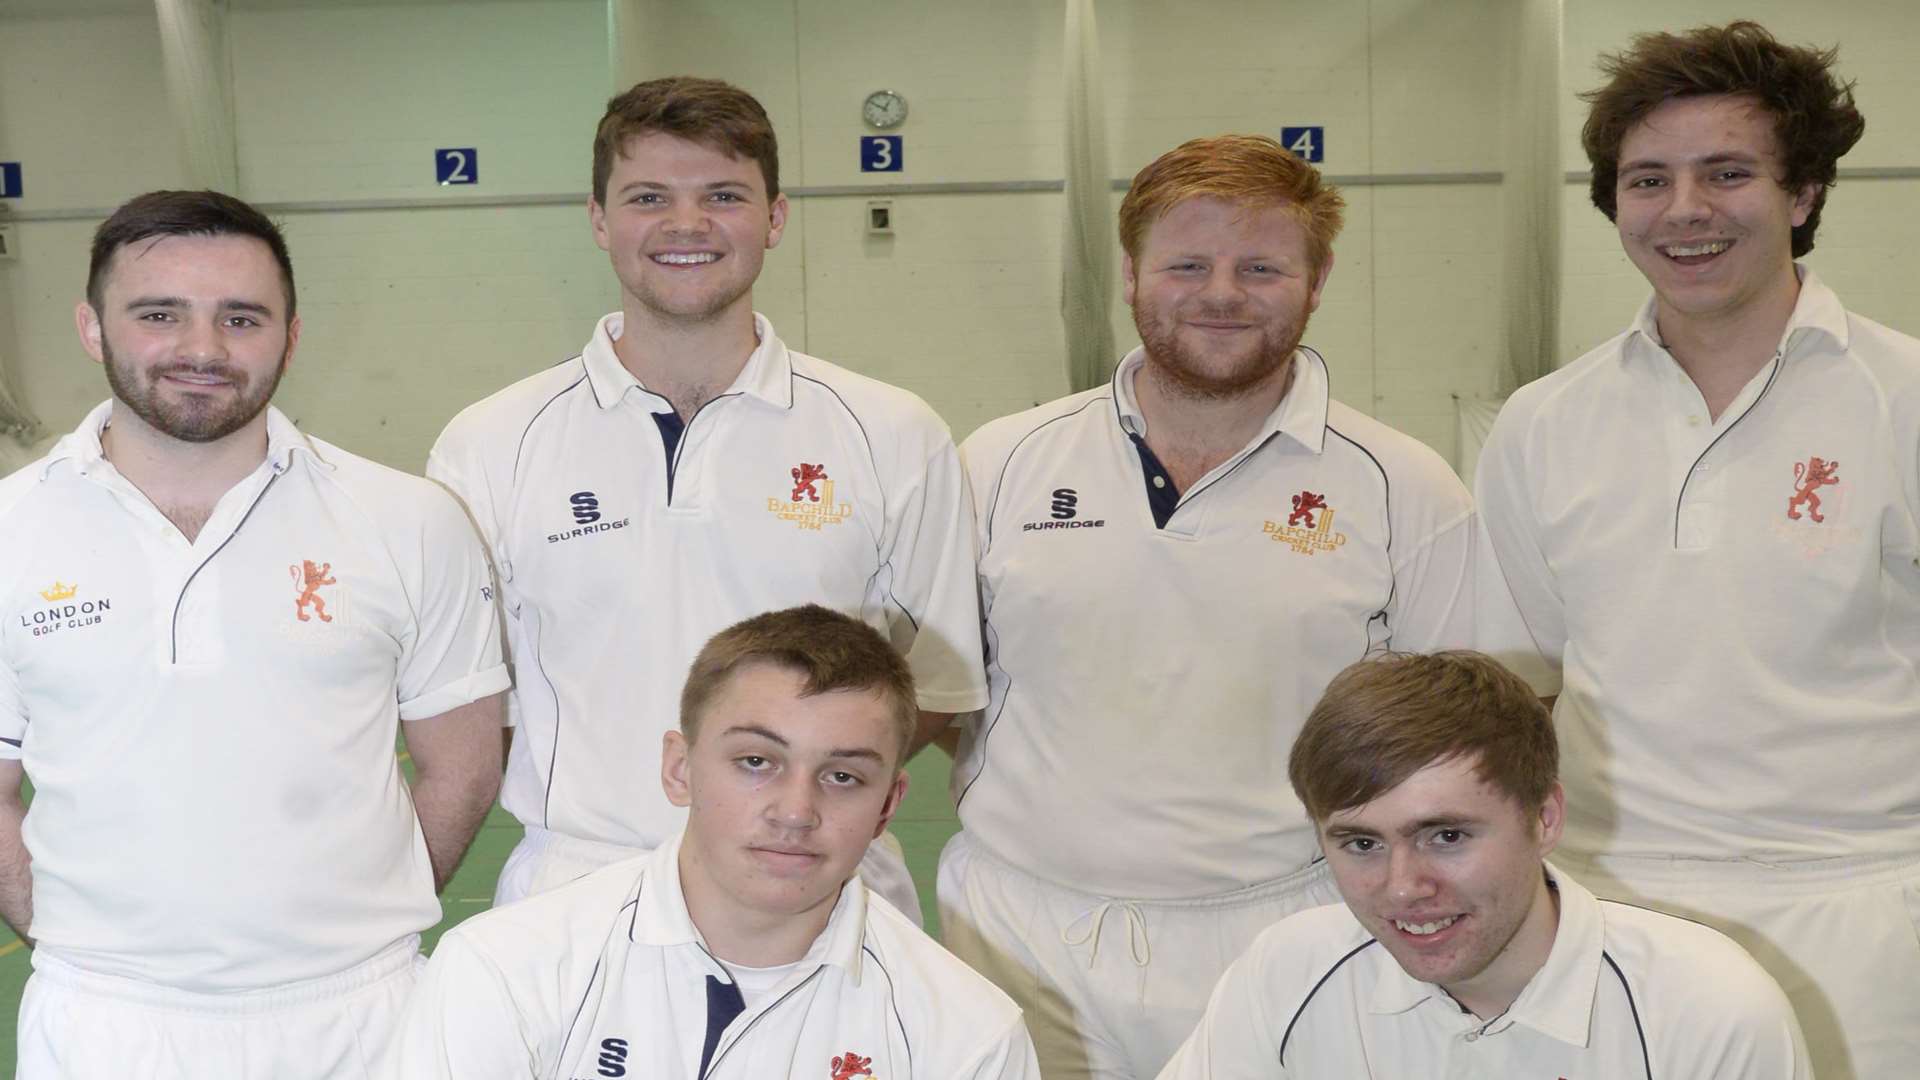 The Bapchild team bowled out for nought at Canterbury on Sunday. Picture: Chris Davey